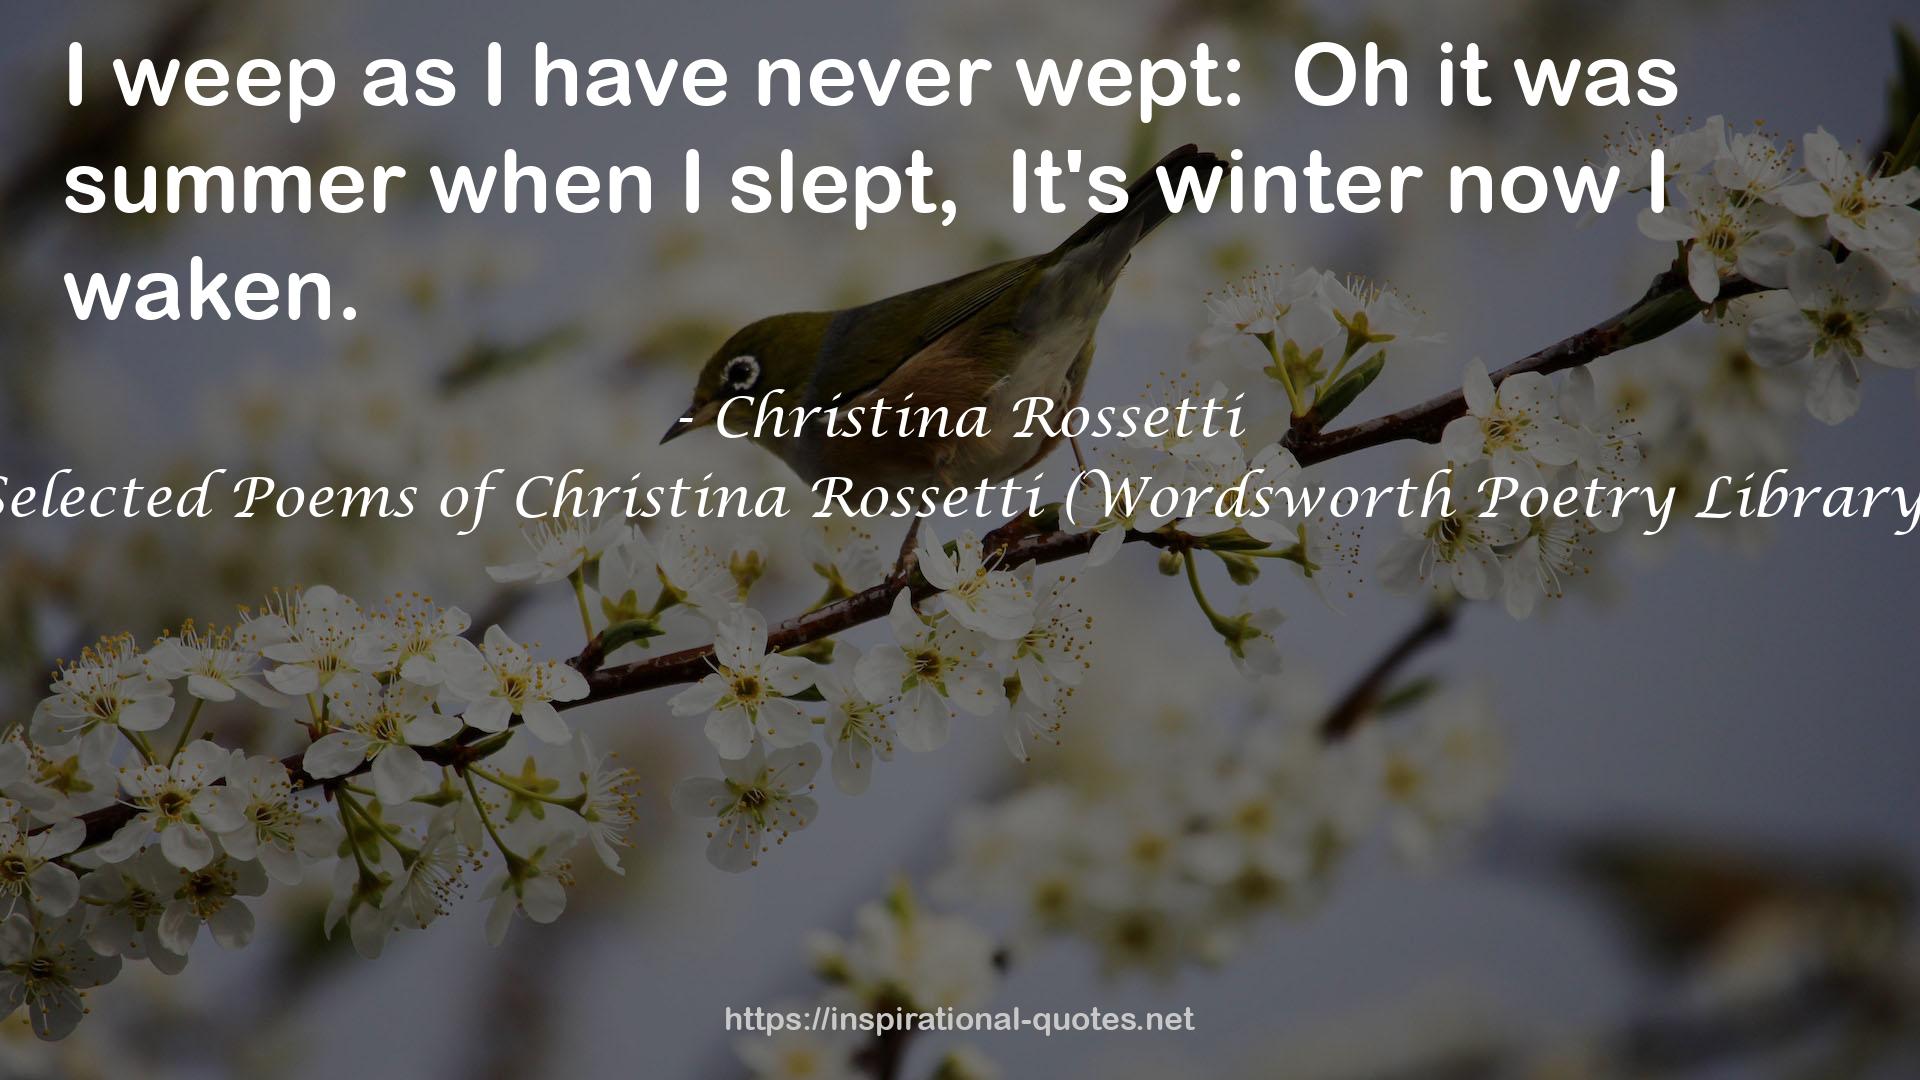 Selected Poems of Christina Rossetti (Wordsworth Poetry Library) QUOTES